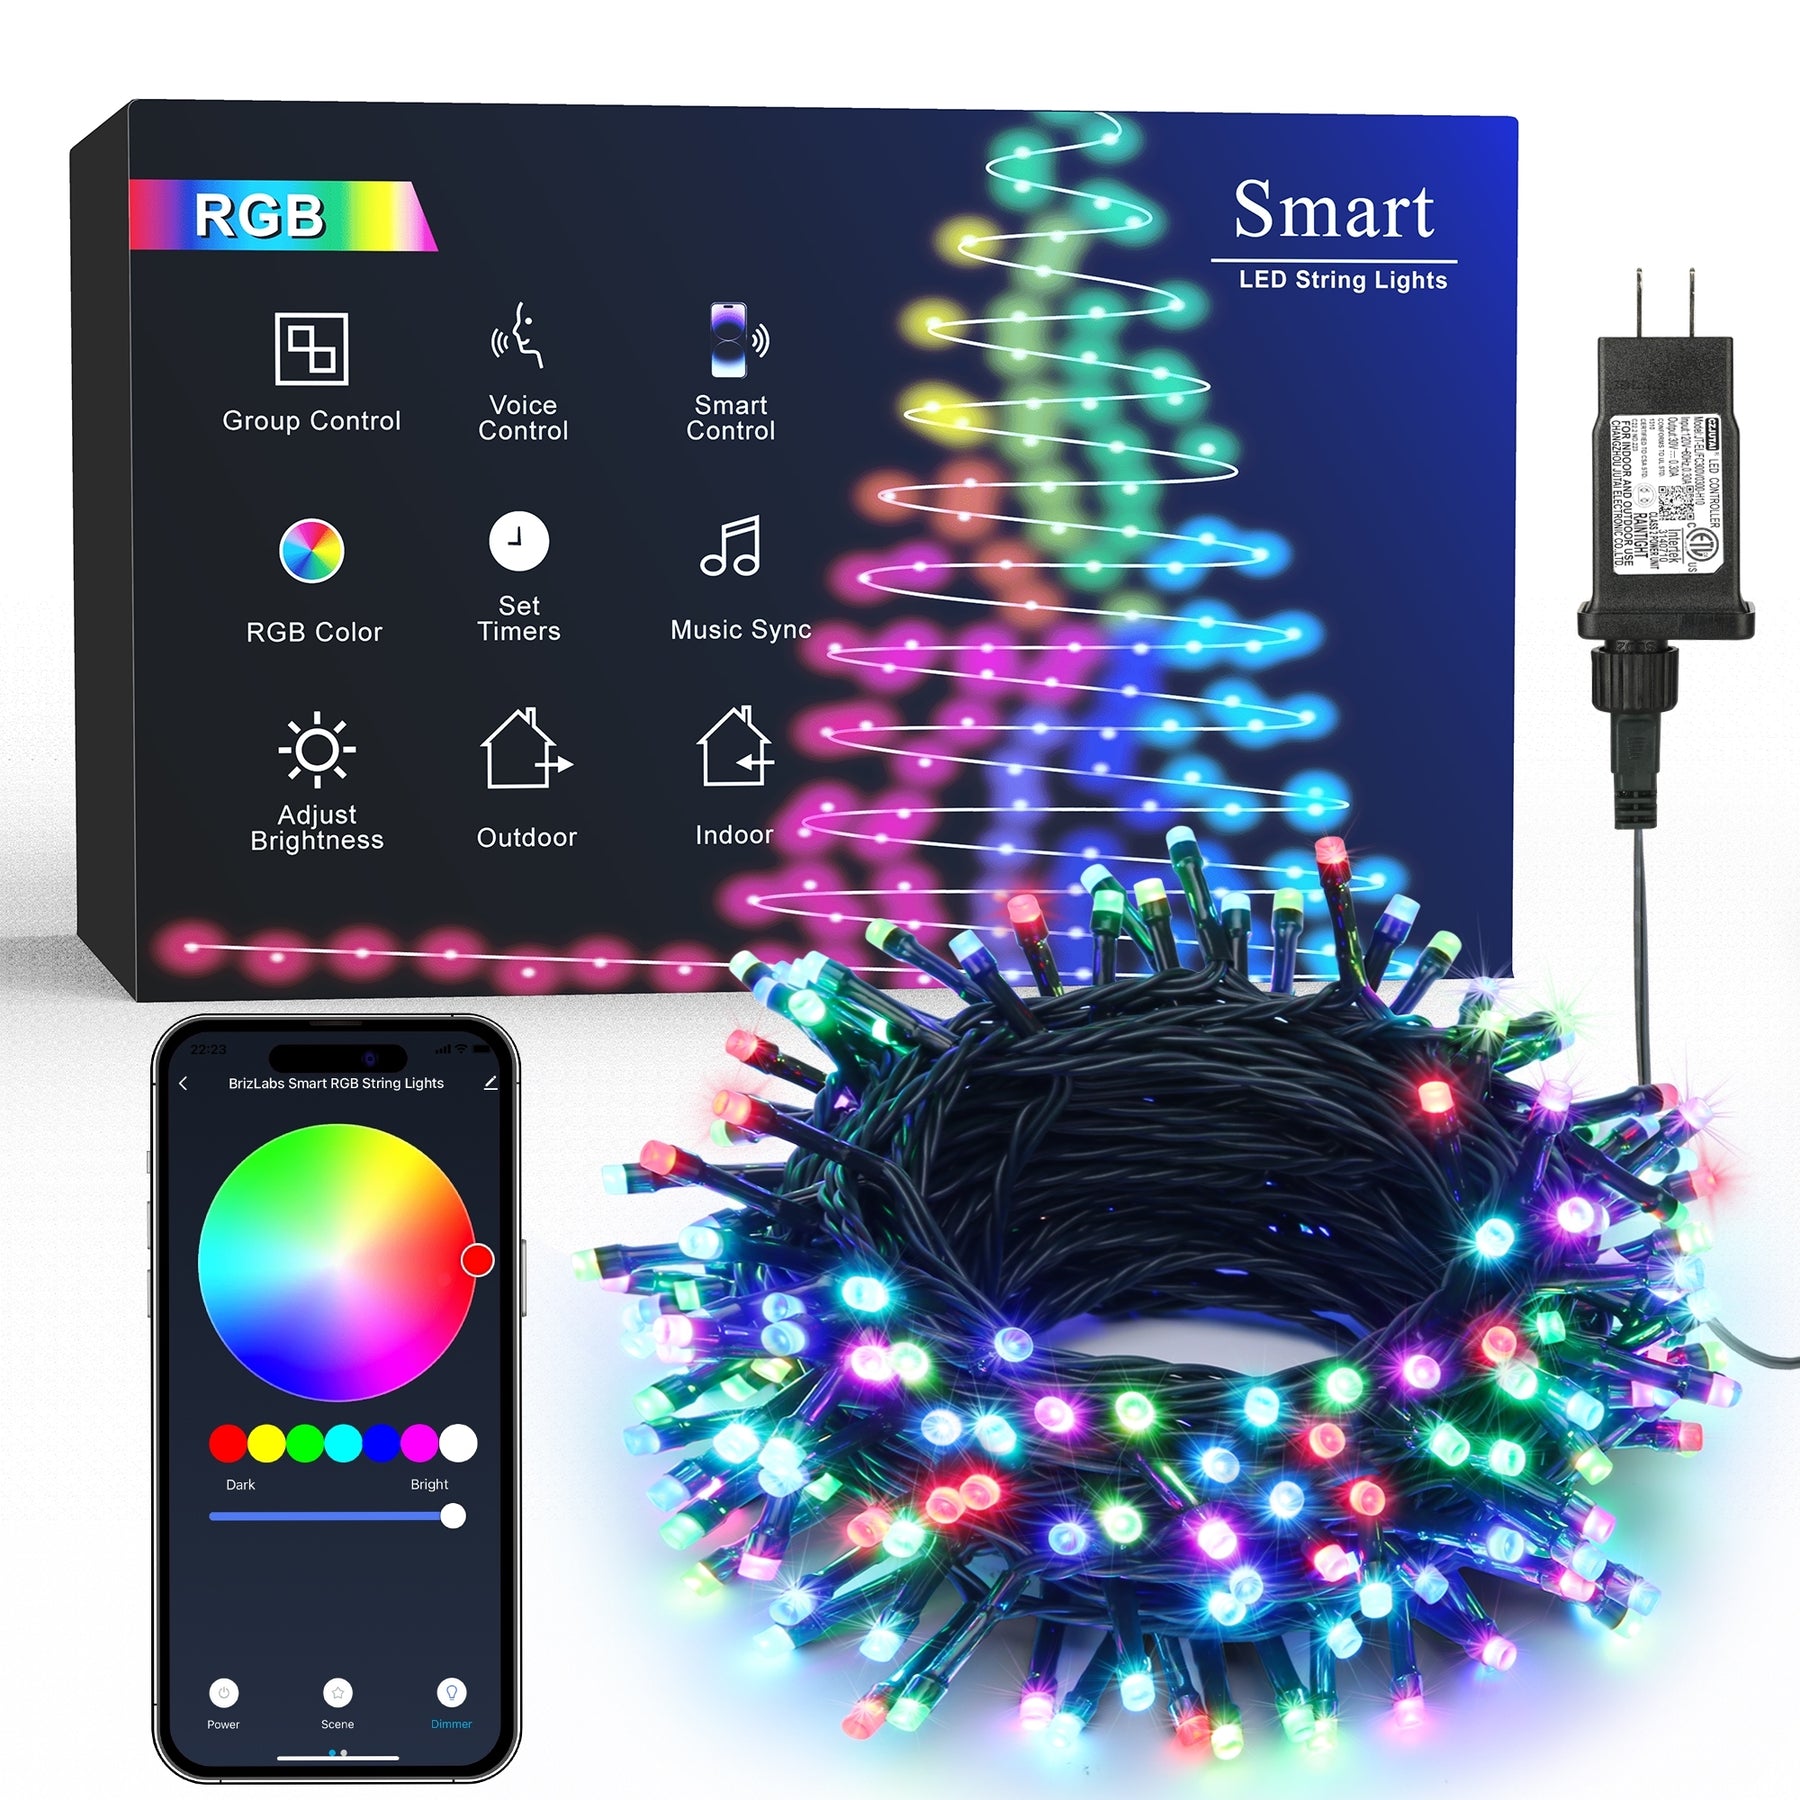 How to connect Christmas lights to Alexa